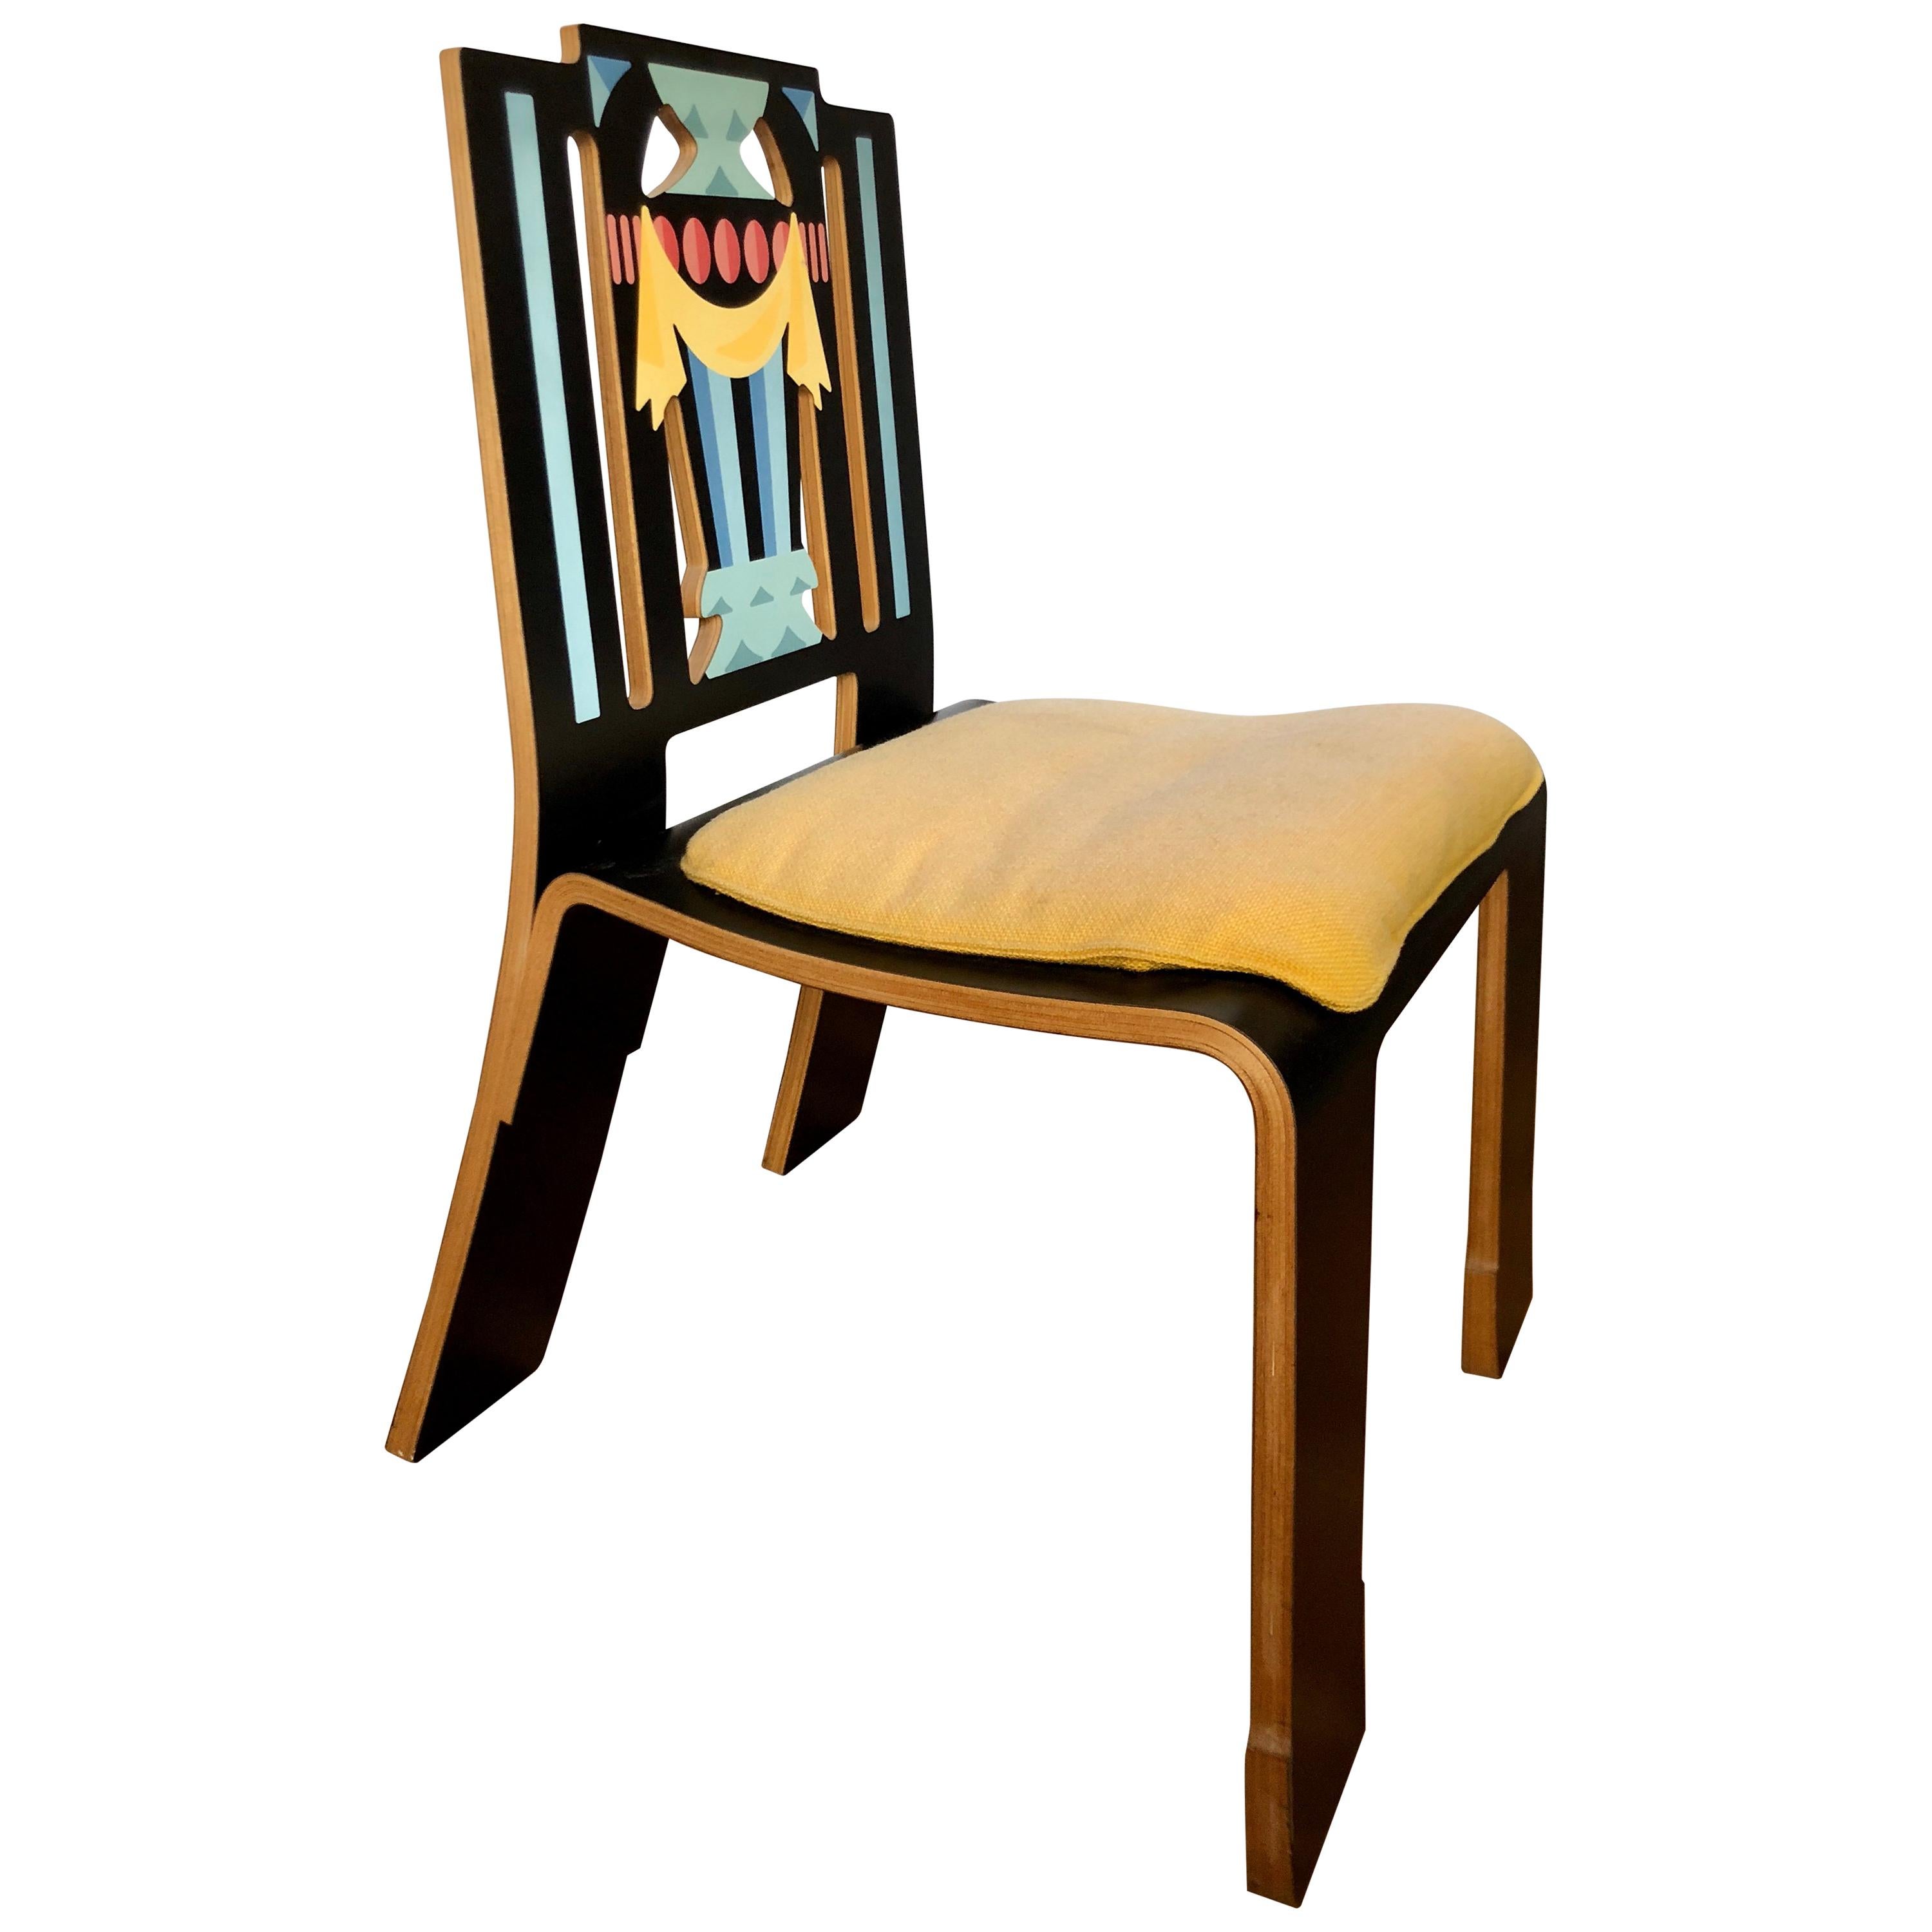 American, black laminate on wood substrate with decal decoration and yellow wool seat cushion, for Knoll Furniture, circa 1984. This witty play on classical form is one of the icons of Postmodernist furniture design.